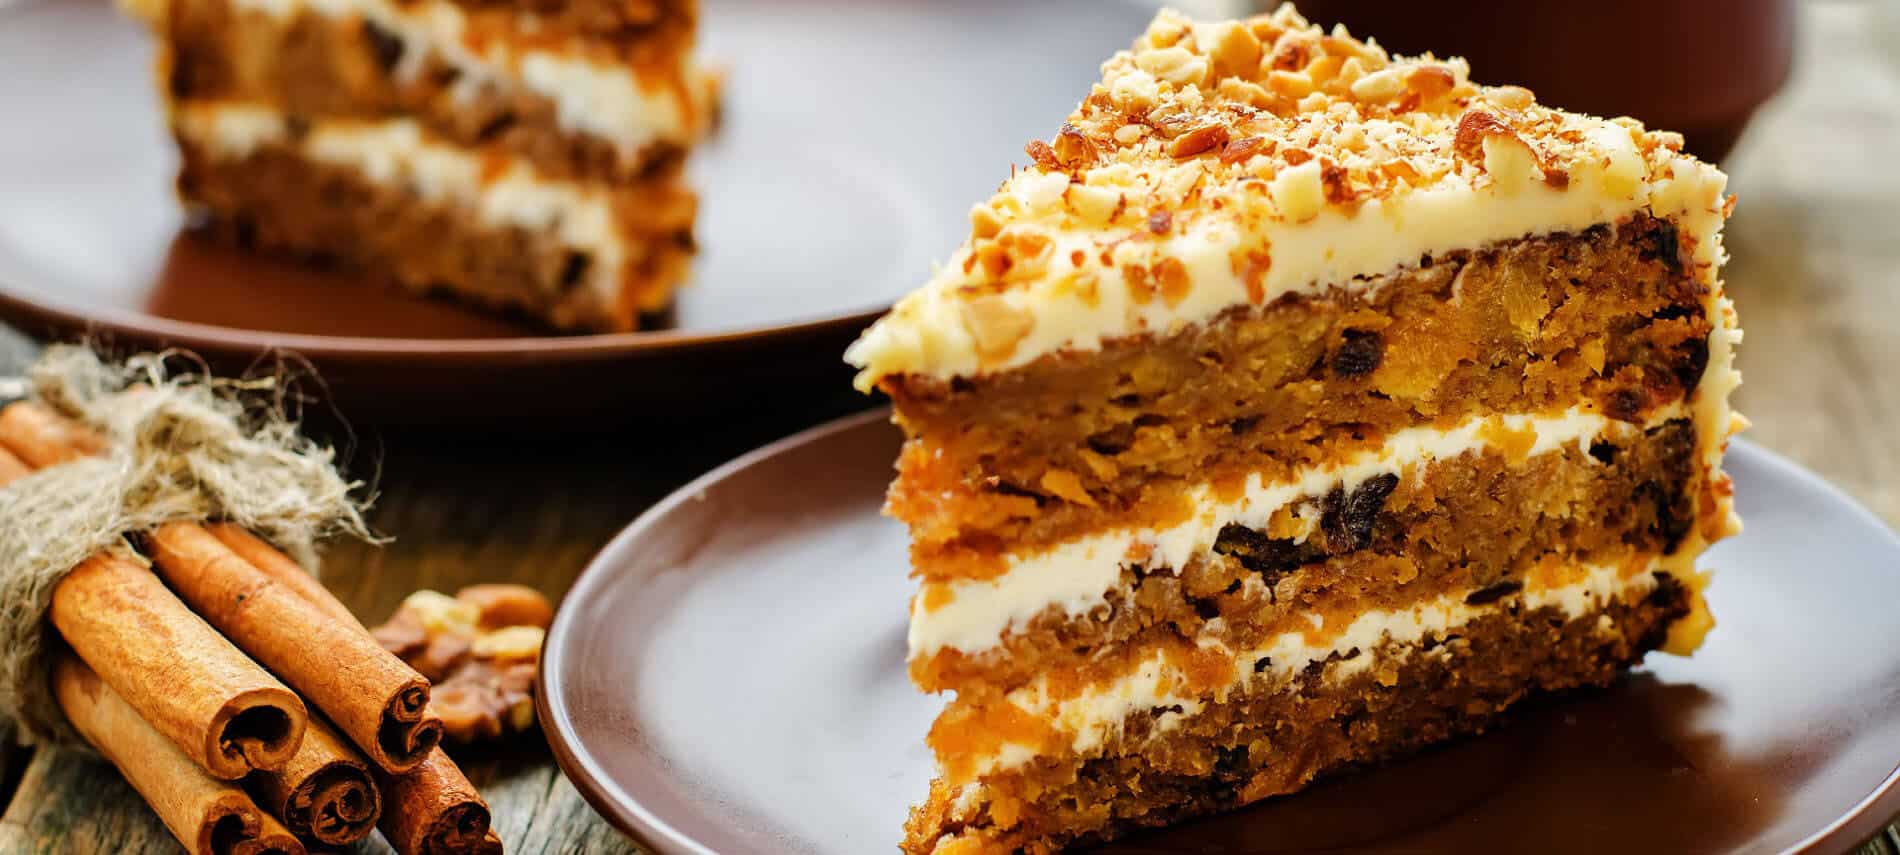 Layeres of Carrot Cake with Cream Cheese Frosting, sprinkled with Chopped Nuts